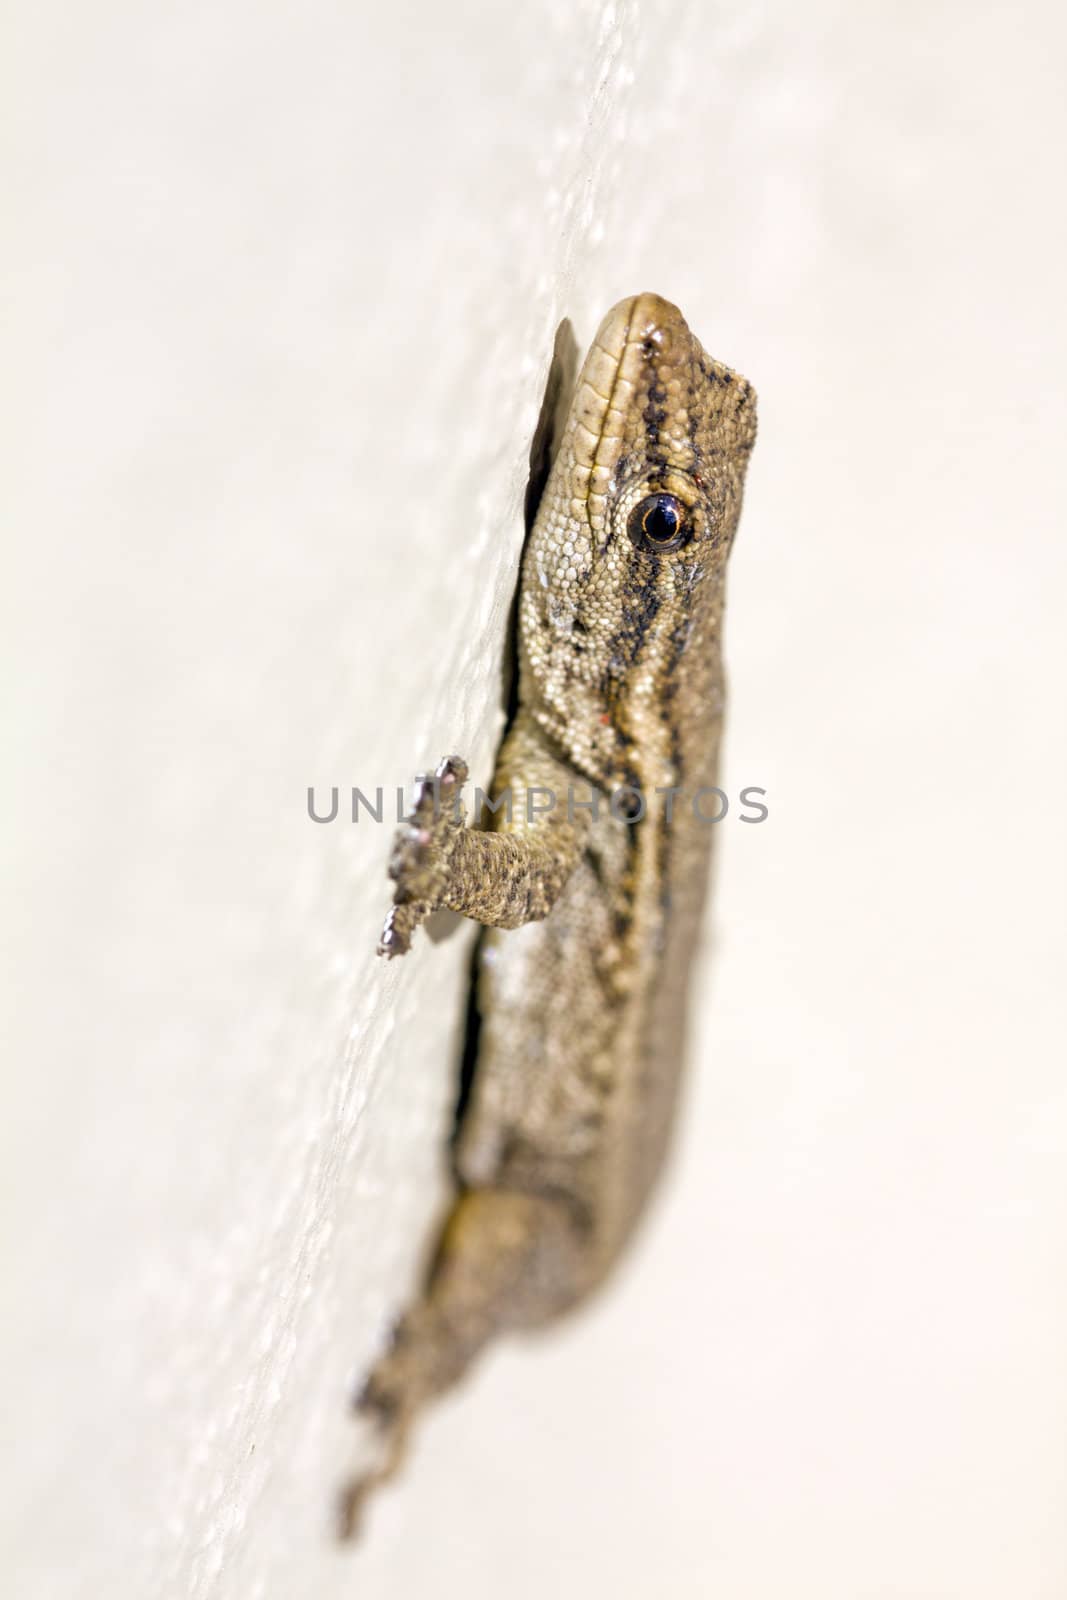 Common Lizard in South Africa (Juvenile)